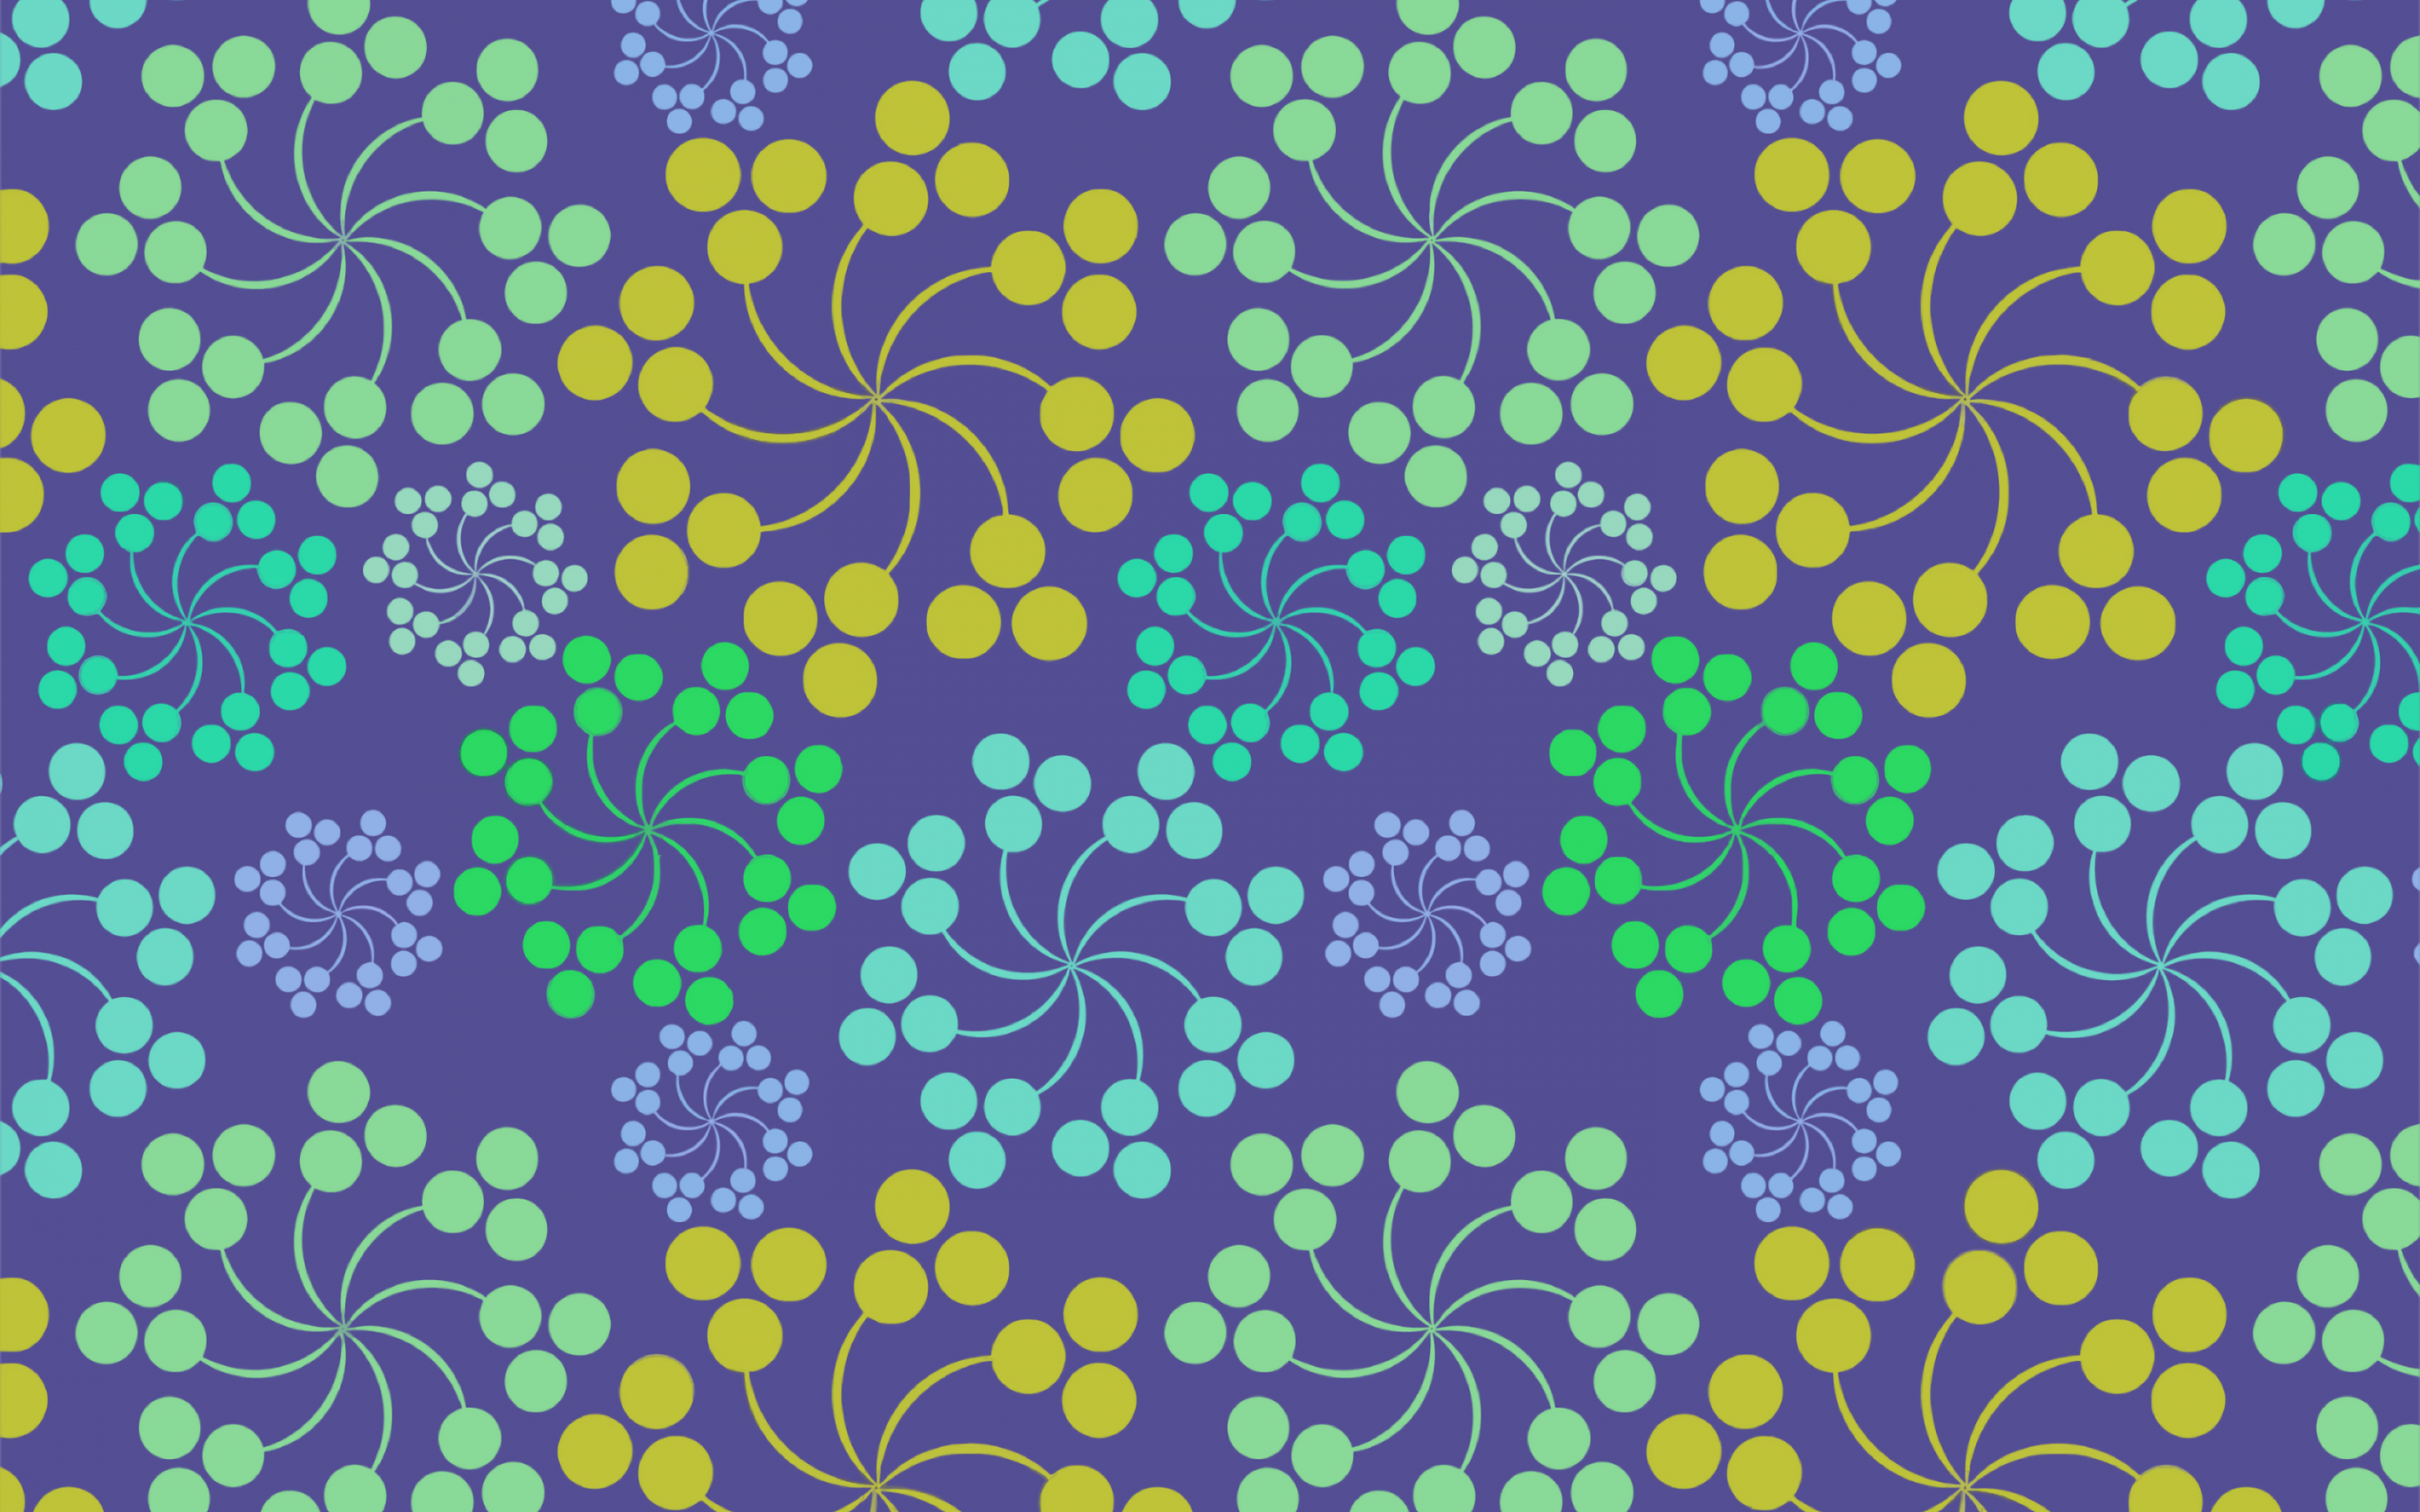 Patterns, circles, twisted, colorful, 2880x1800 wallpaper